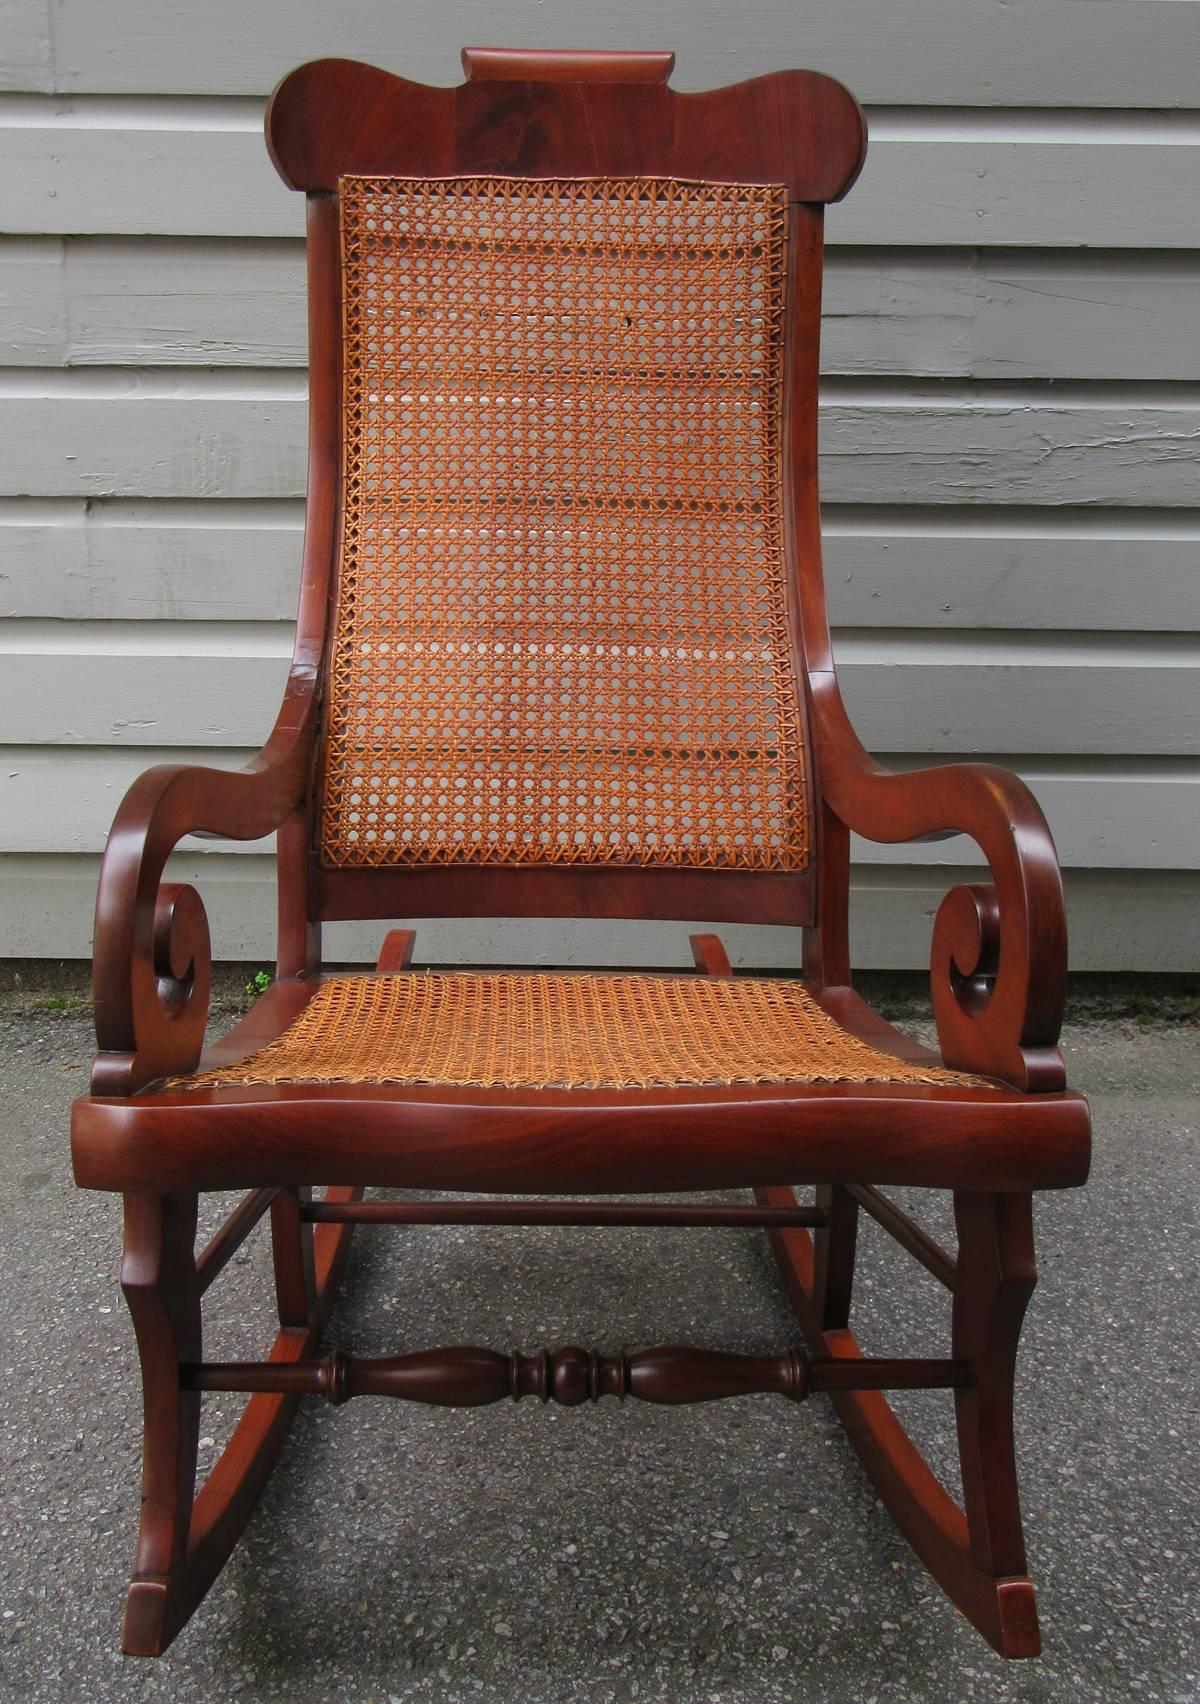 A Caribbean mahogany and cane rocking chair from St. Croix, circa 1830, featuring Regency scroll arms, clean lines and handwoven caning.